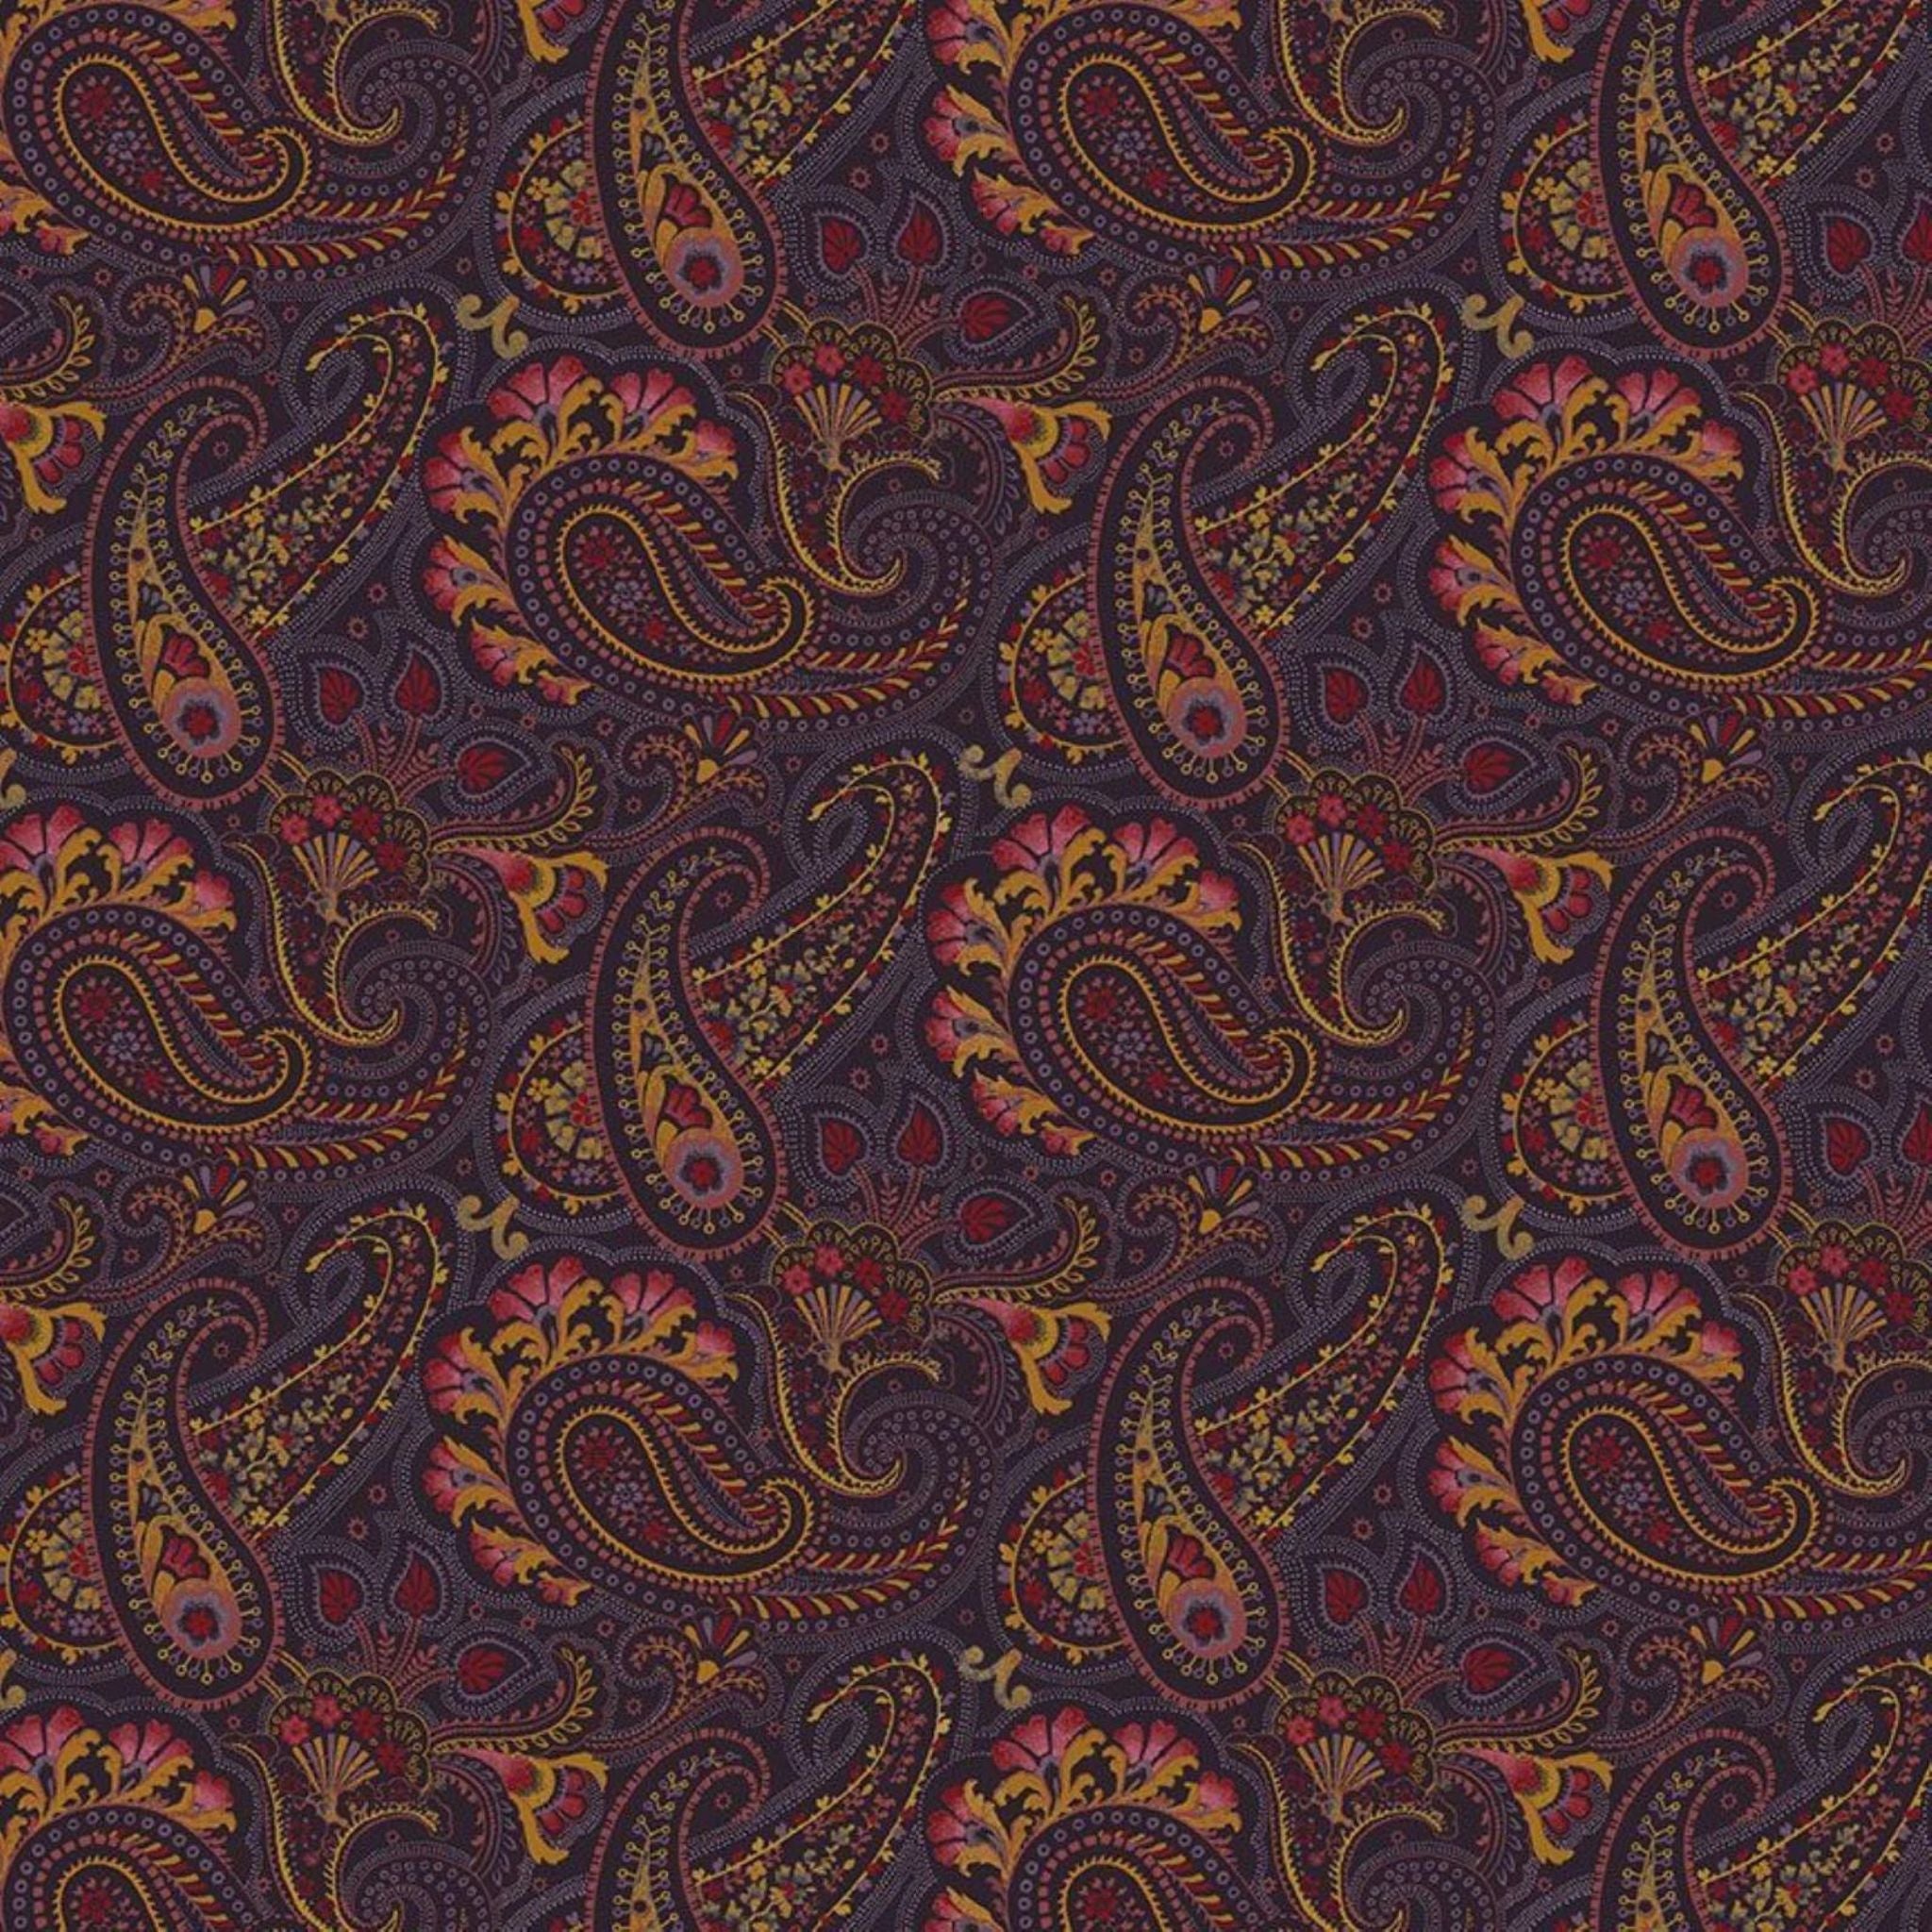 Burgundy fabric with paisley pattern in browns - Laurel by Timeless Treasures